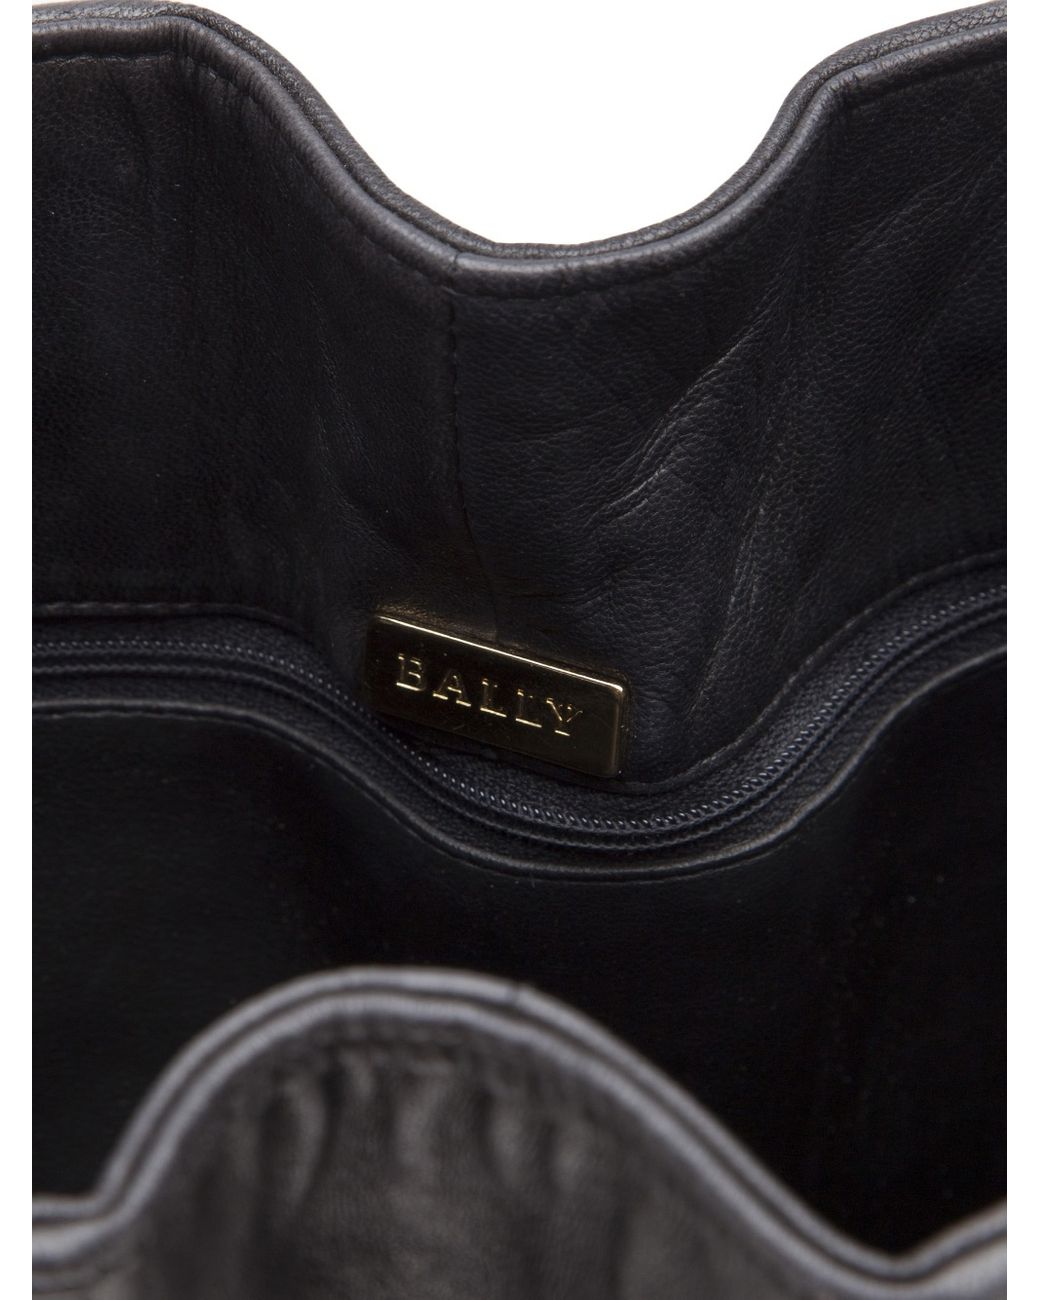 Bally Quilted Leather Drawstring Bag in Black